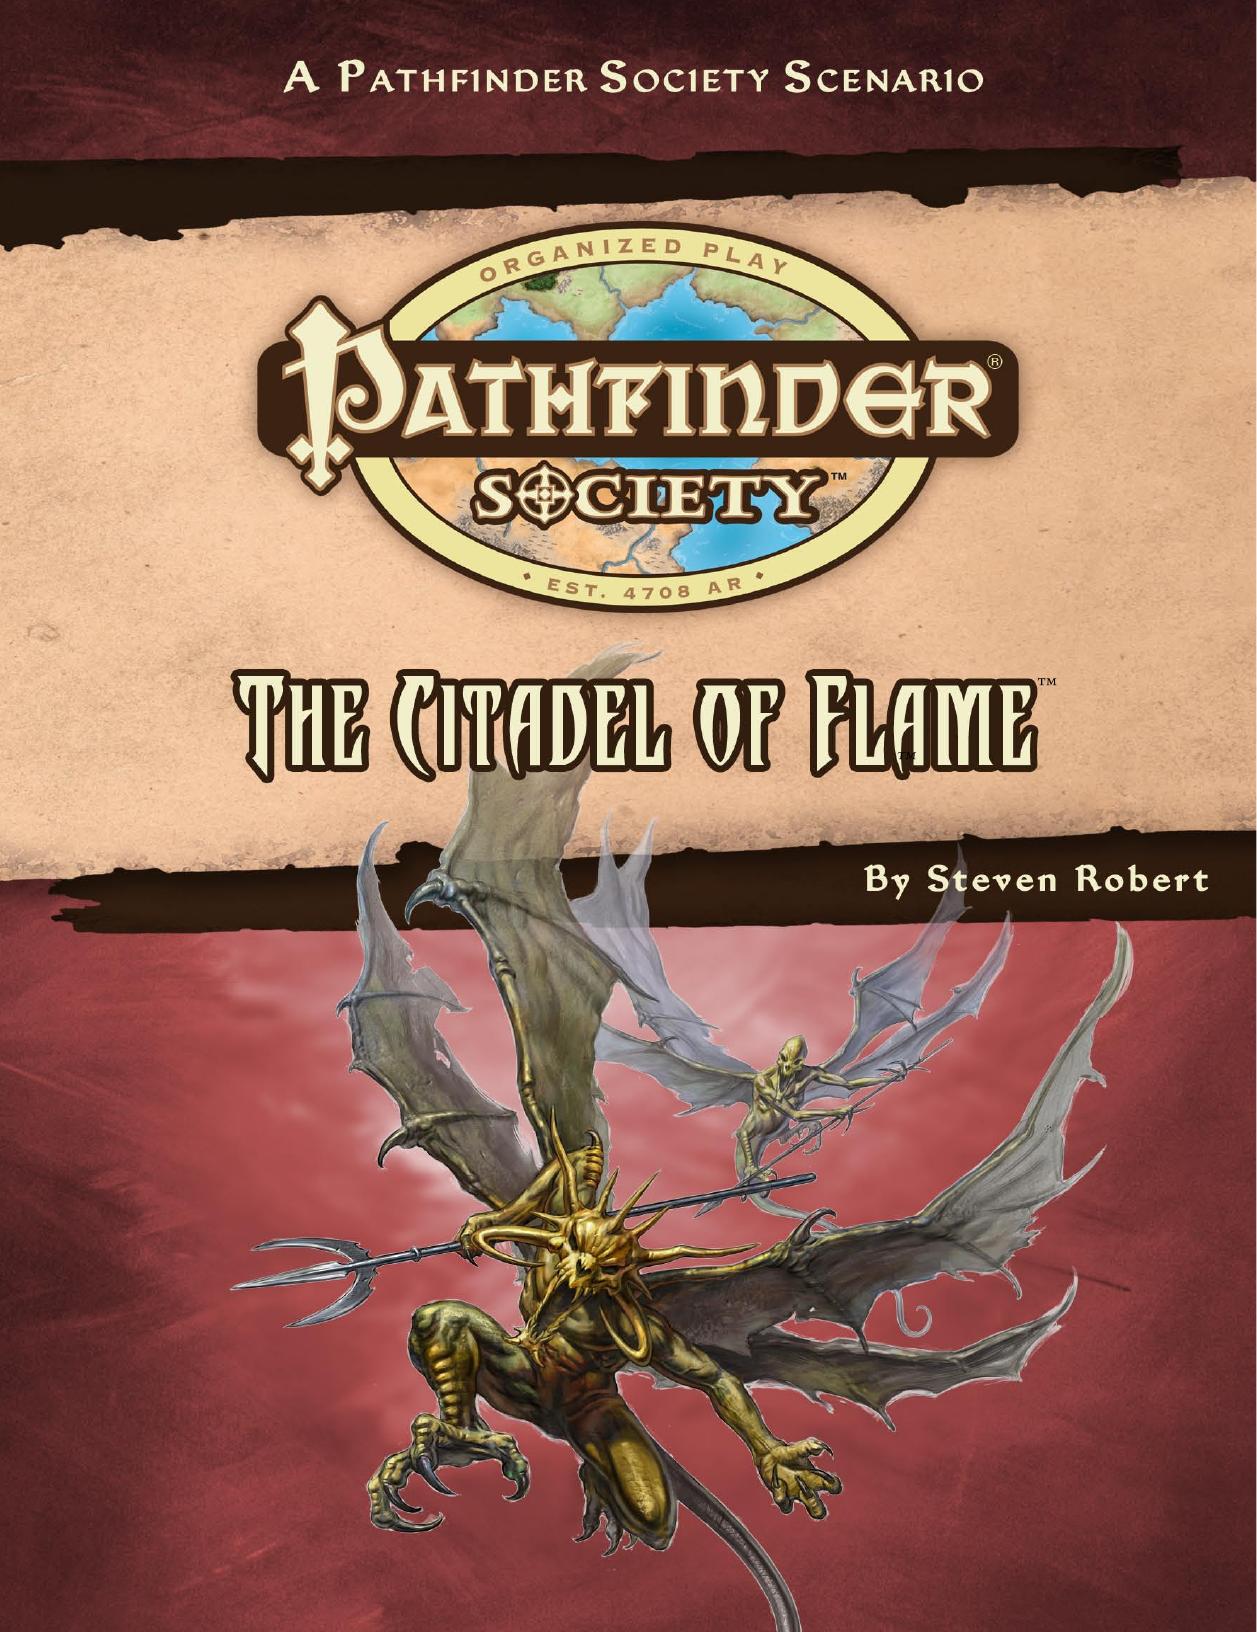 Pathfinder Society: The Citadel of Flame